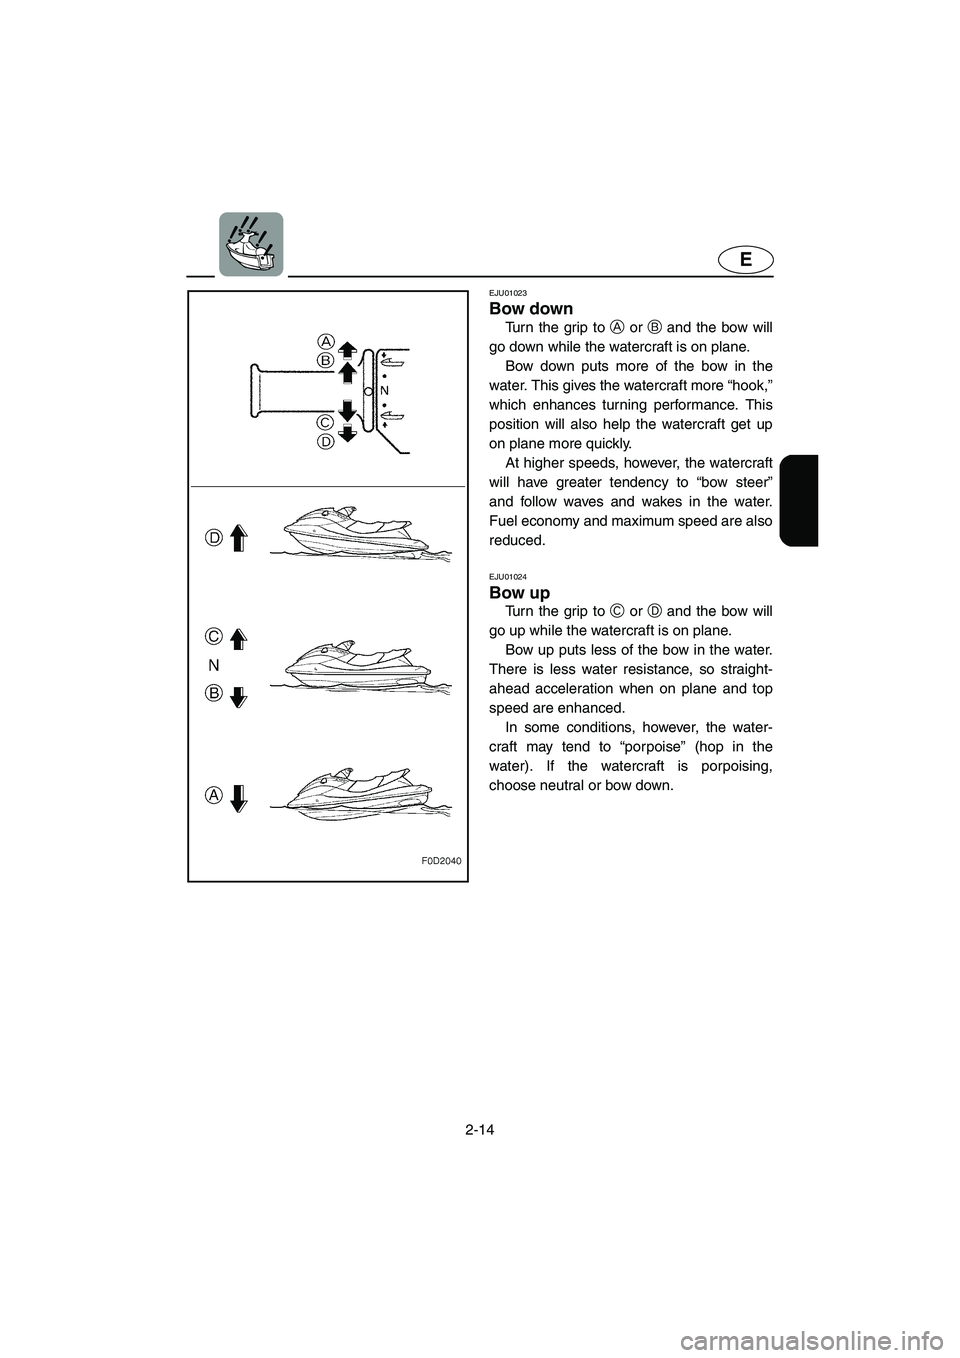 YAMAHA FX CRUISER 2006 Service Manual 2-14
E
EJU01023 
Bow down  
Turn the grip to A or B and the bow will
go down while the watercraft is on plane. 
Bow down puts more of the bow in the
water. This gives the watercraft more “hook,”
w